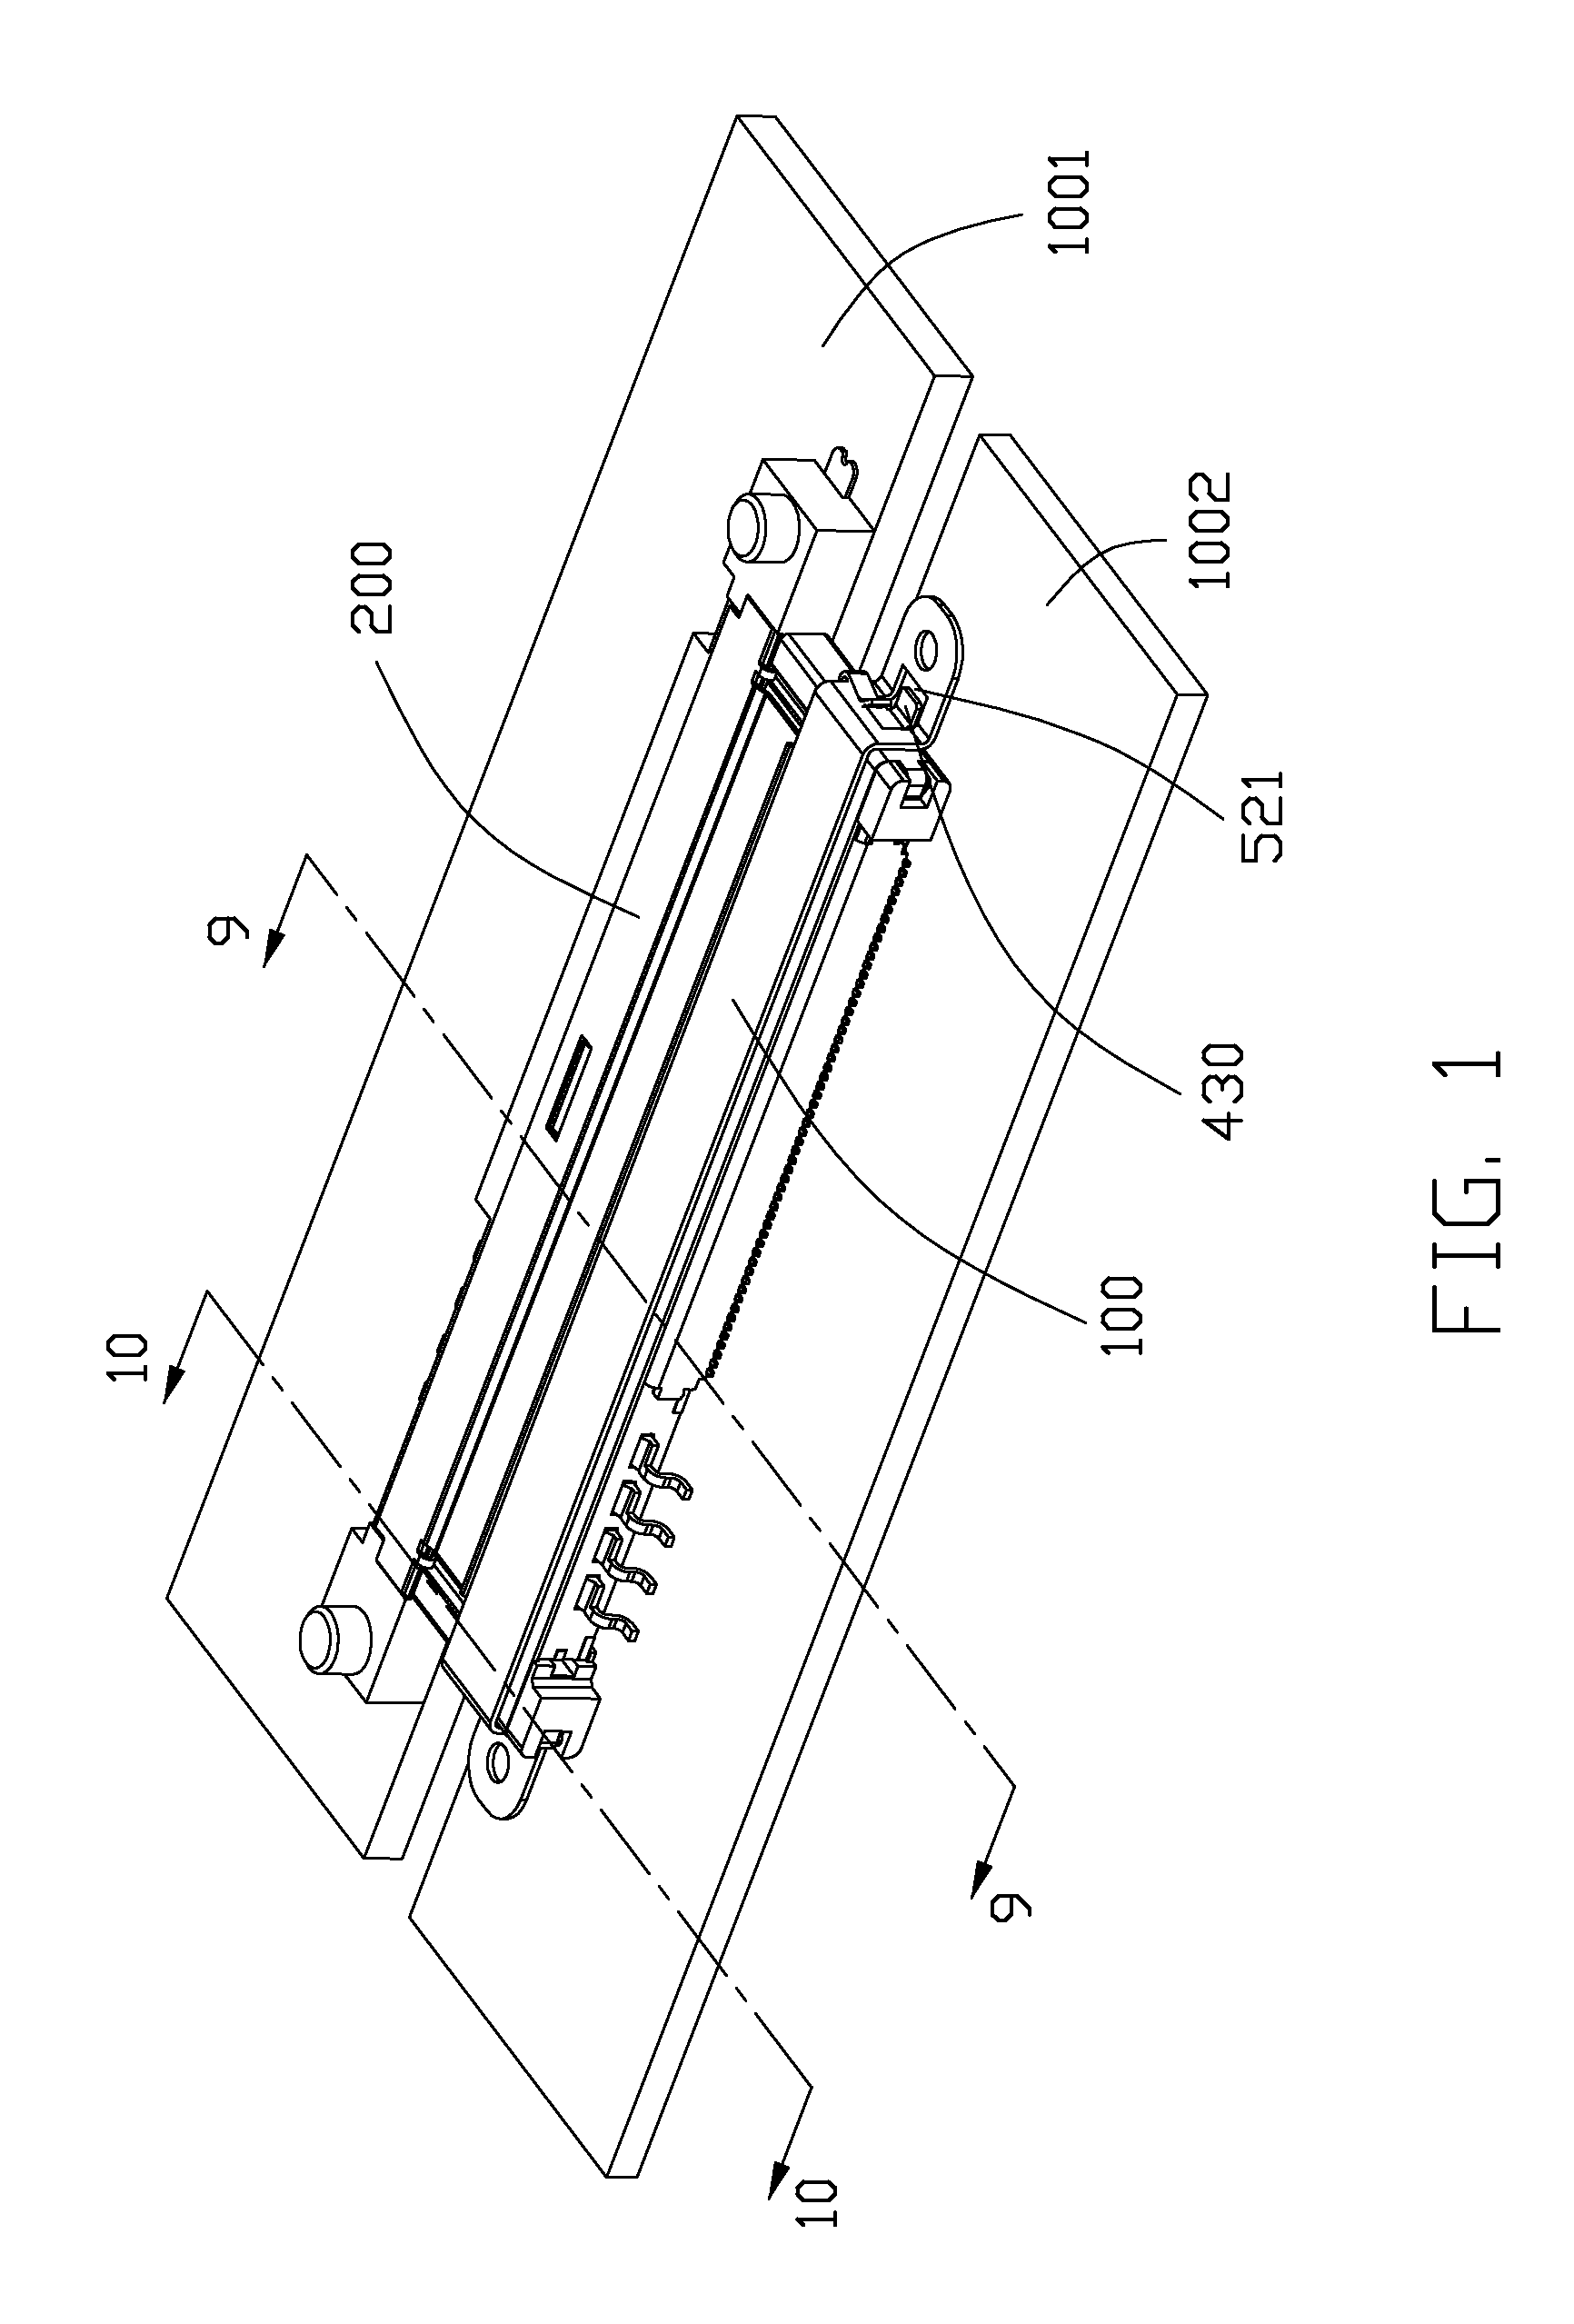 Electrical connector having improved insulative housing